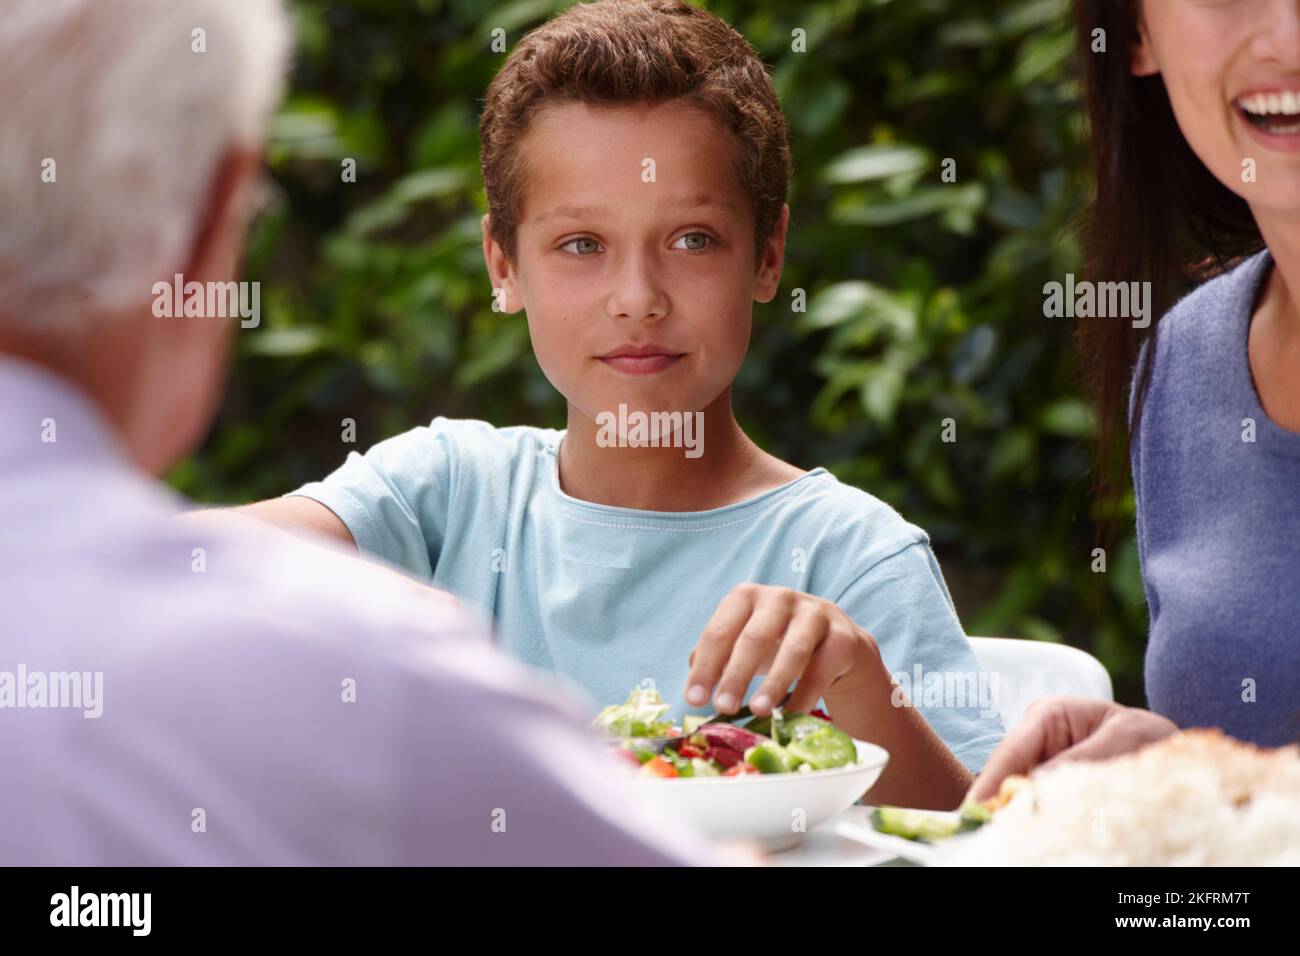 Food and family. a little boy having lunch with his family outside. Stock Photo